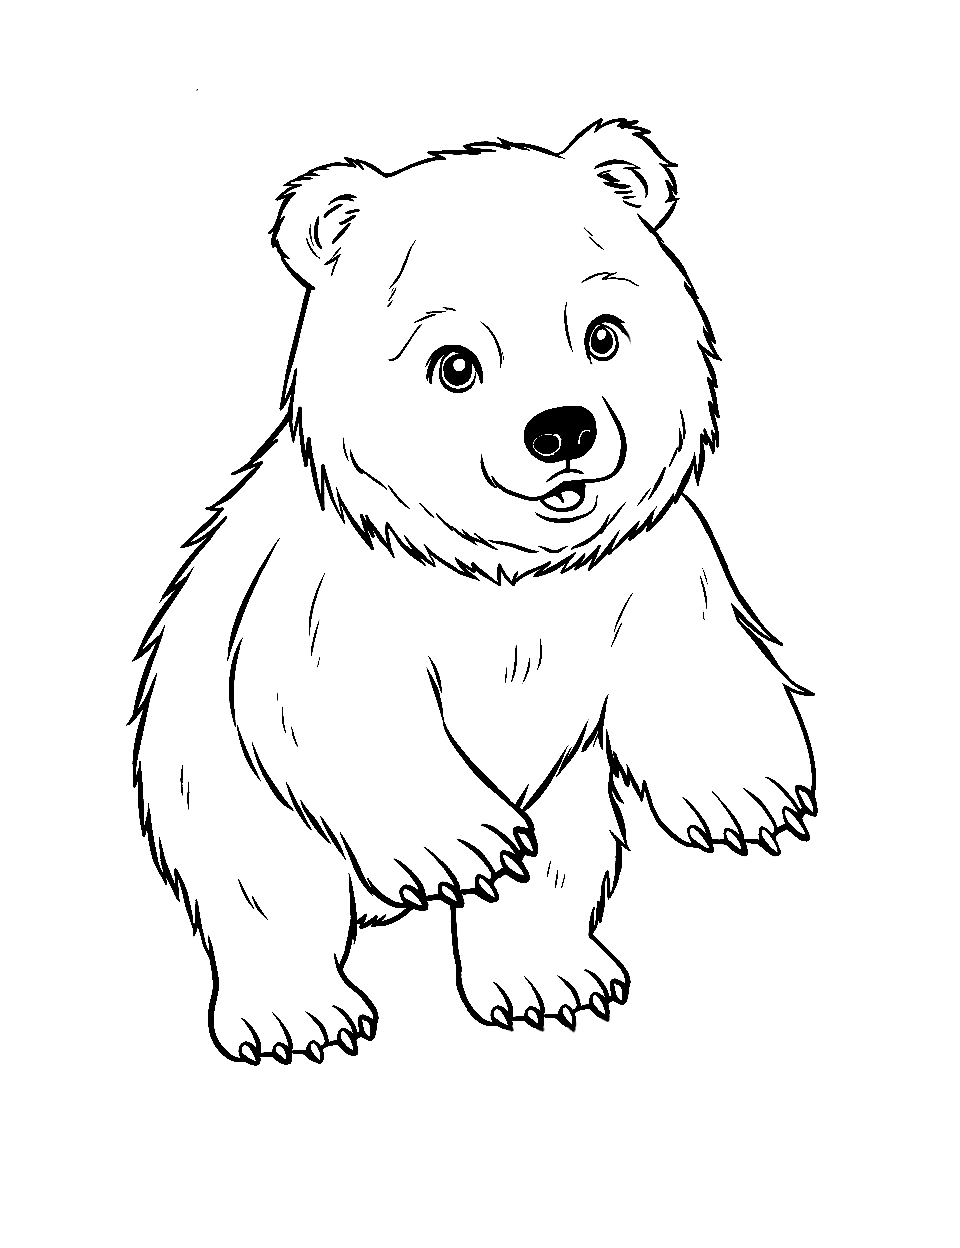 Baby Bear's First Steps Coloring Page - A cute baby bear taking its first wobbly steps.